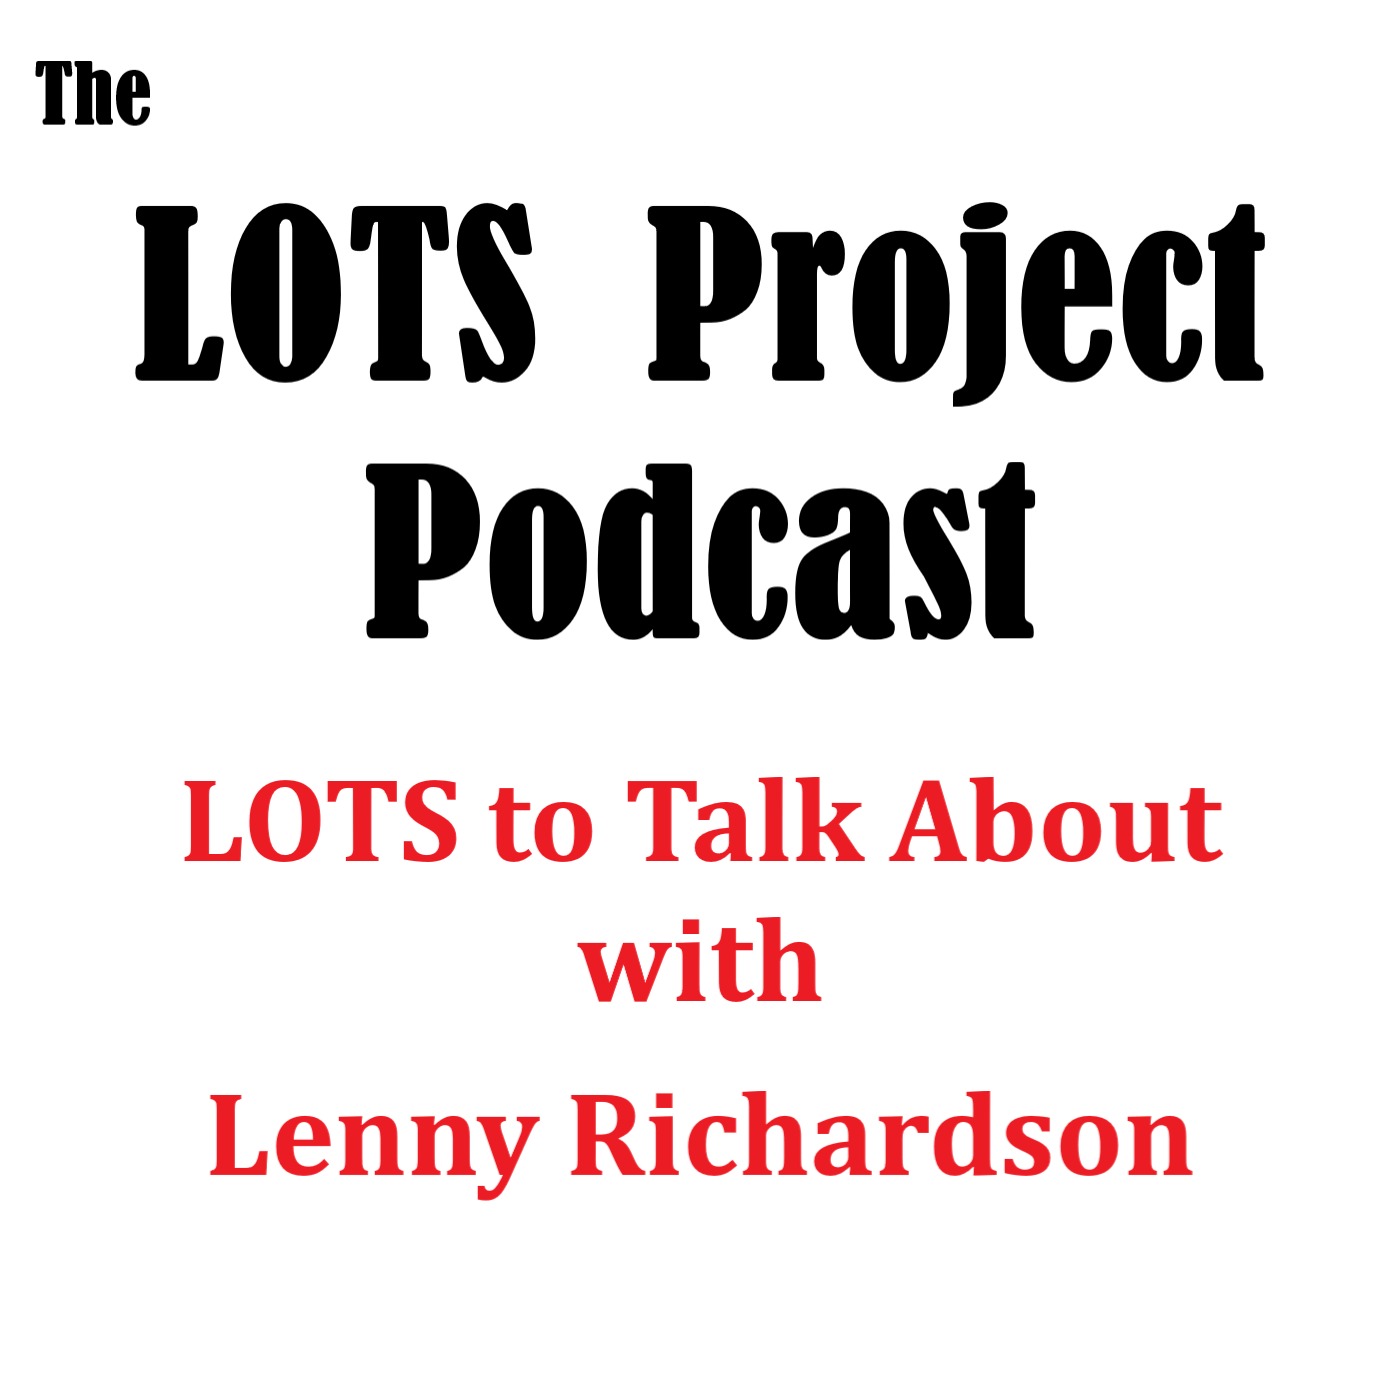 LOTS to Talk About with Lenny Richardson  #interview #podcast #live #goodlife #imrove #better